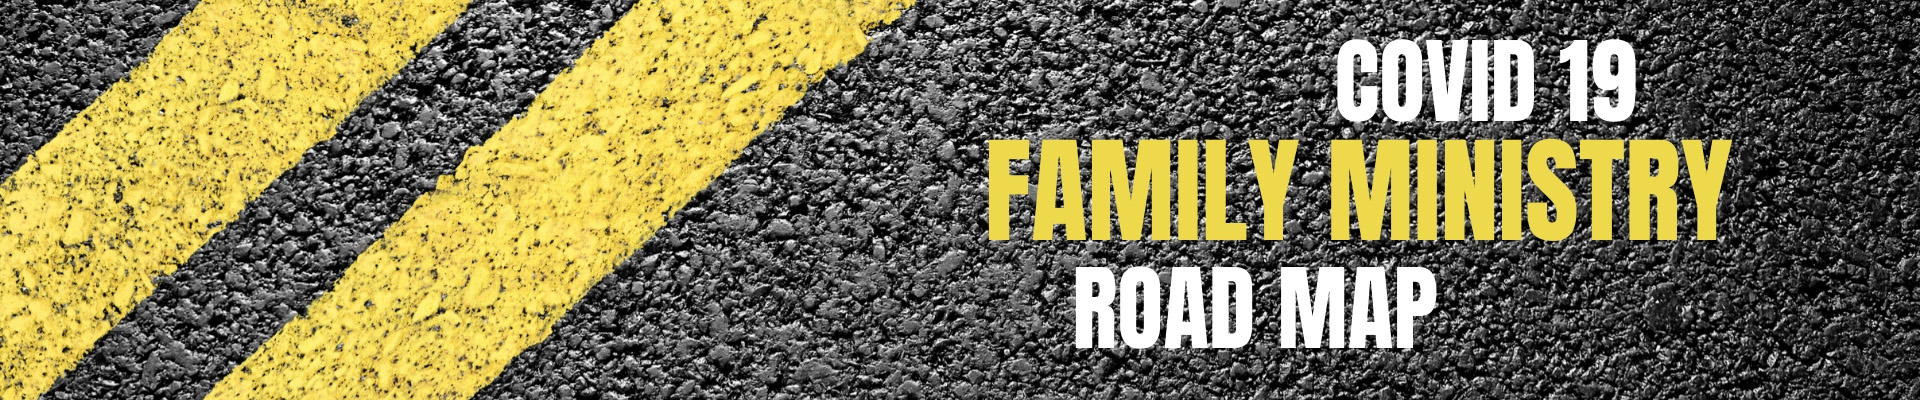 Covid 19 Family Ministry Roadmap Banner 400